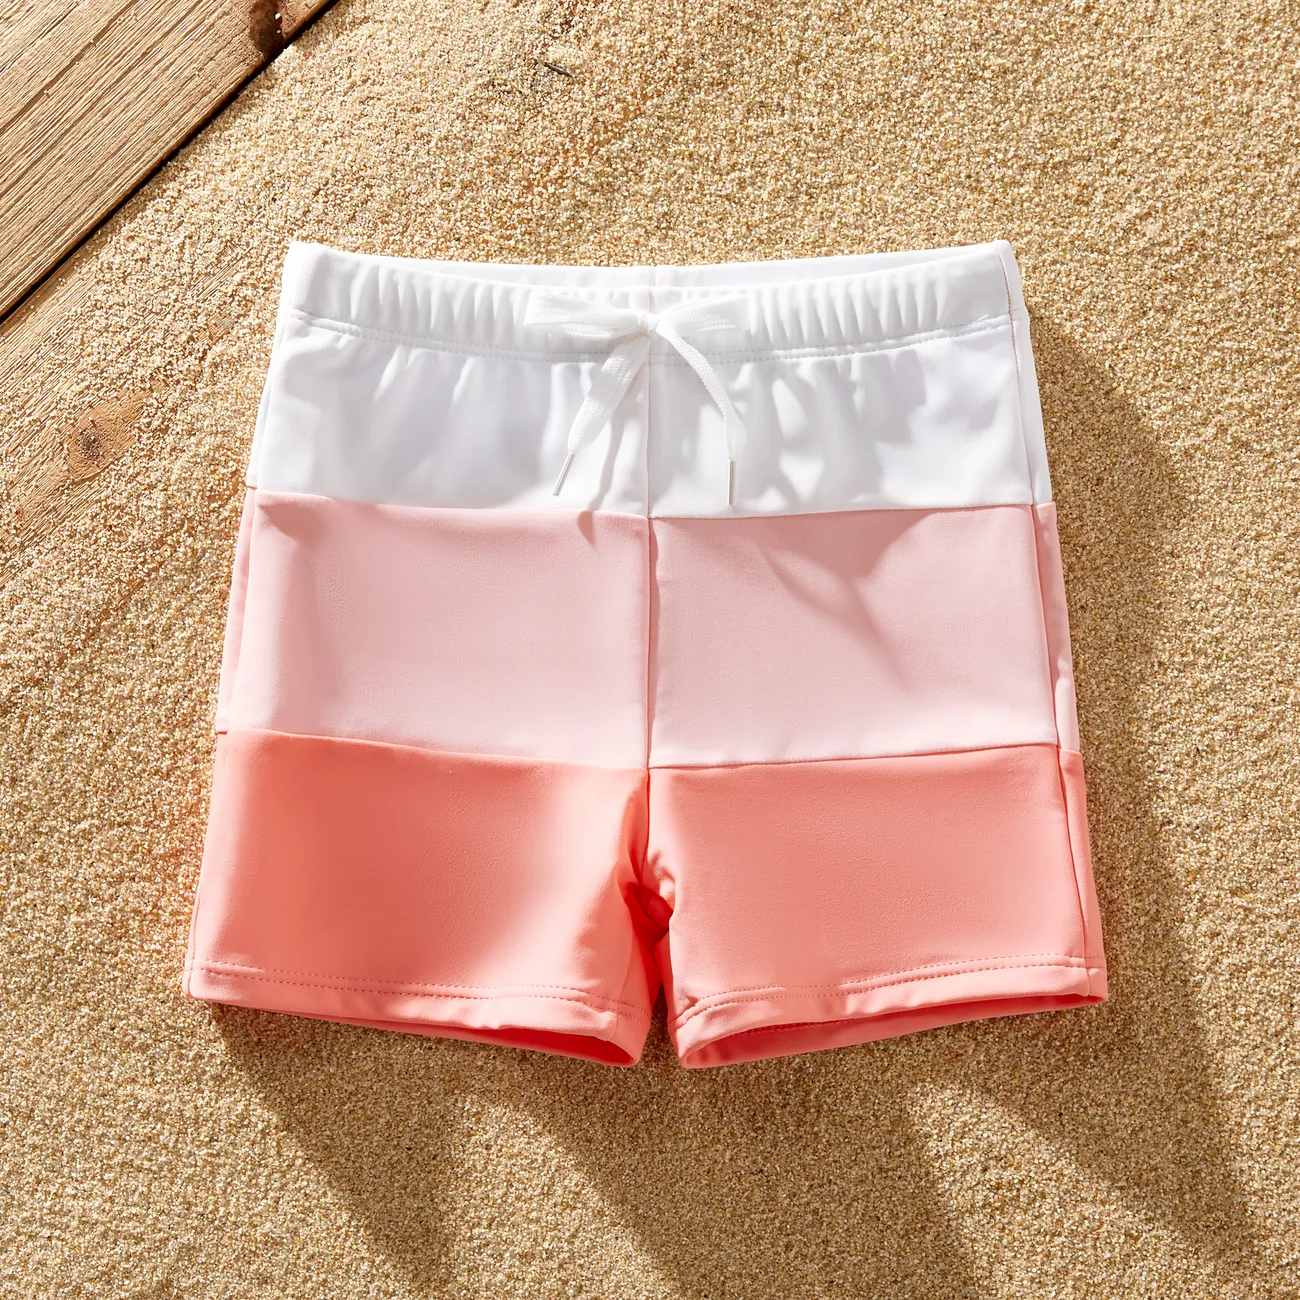 Family Matching Gradient Color Swim Trunks or 3D Flower Ornament One-Piece Swimsuit Pink big image 1